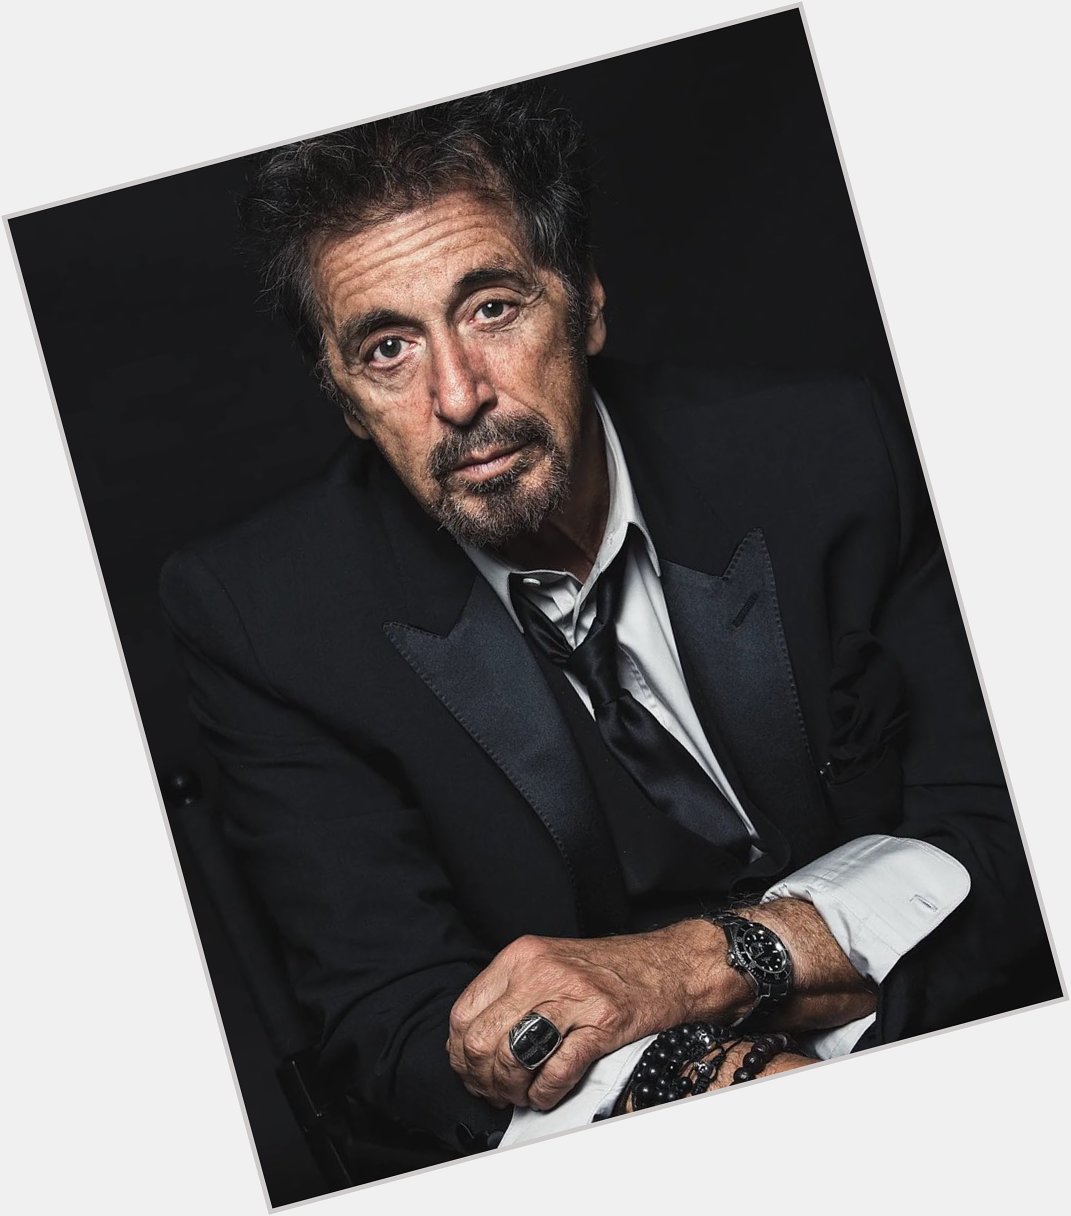 Happy Birthday to Al Pacino, who turns 83 today

What your favourite Al Pacino movie? 